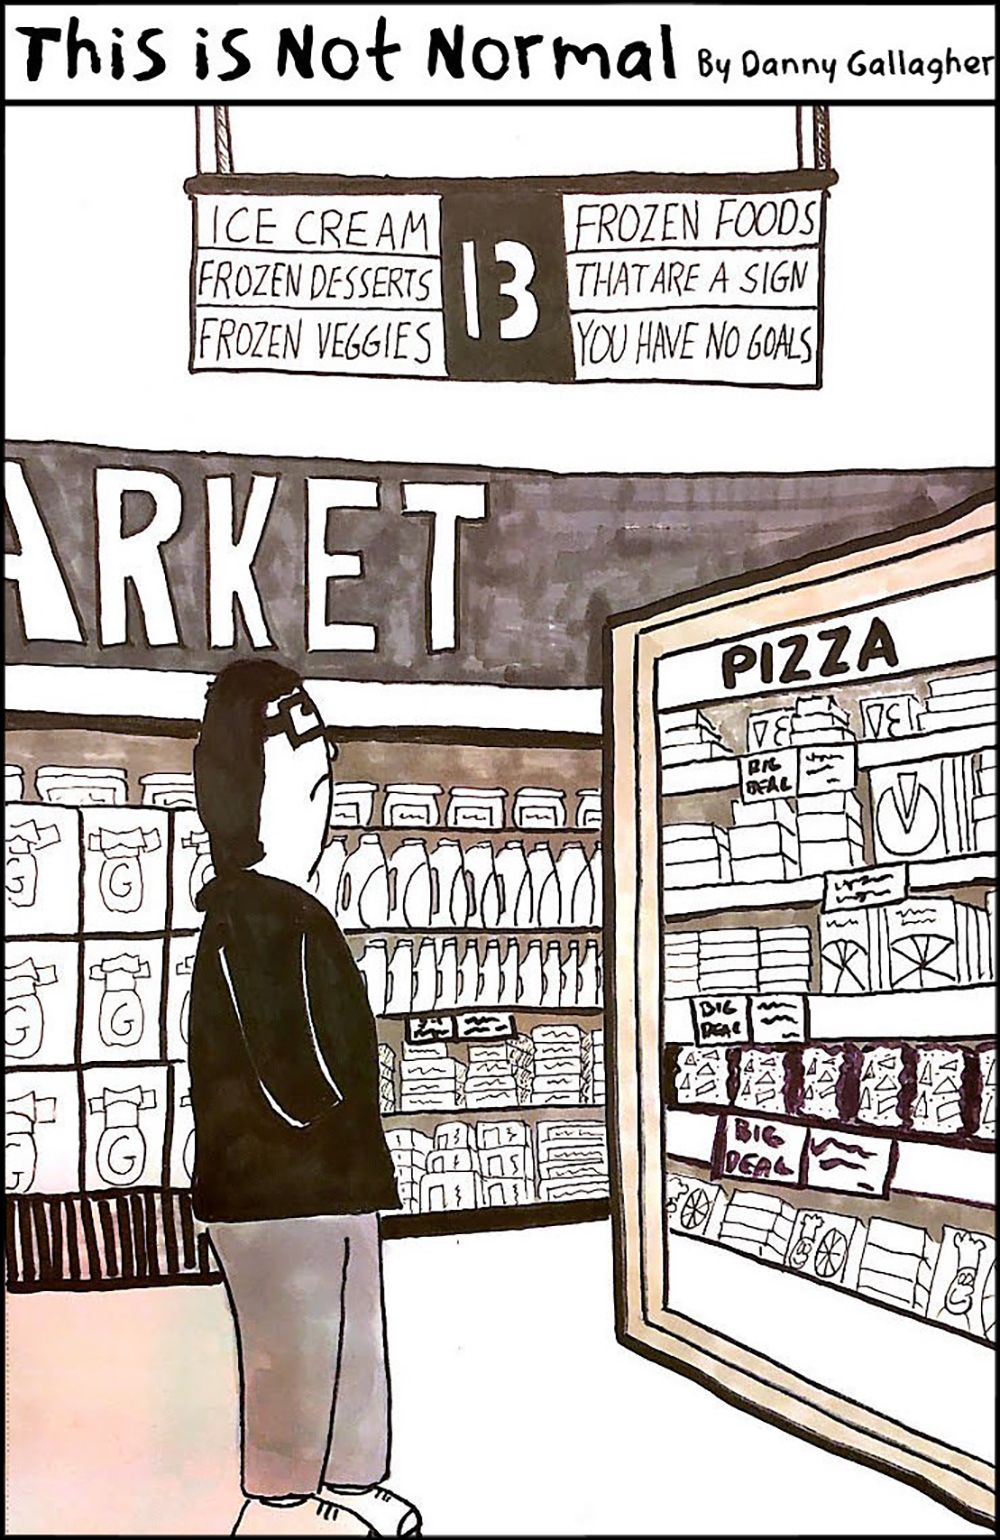 This Is Not Normal, a cartoon by Danny Gallagher  |  In this single-panel cartoon, Danny stands in the frozen food aisle of the supermarket, staring up at a sign which reads "Aisle 13." Below that on the left the sign says, "Ice cream, frozen desserts, frozen veggies." On the right side, it says, "Frozen foods that are a sign you have no goals."